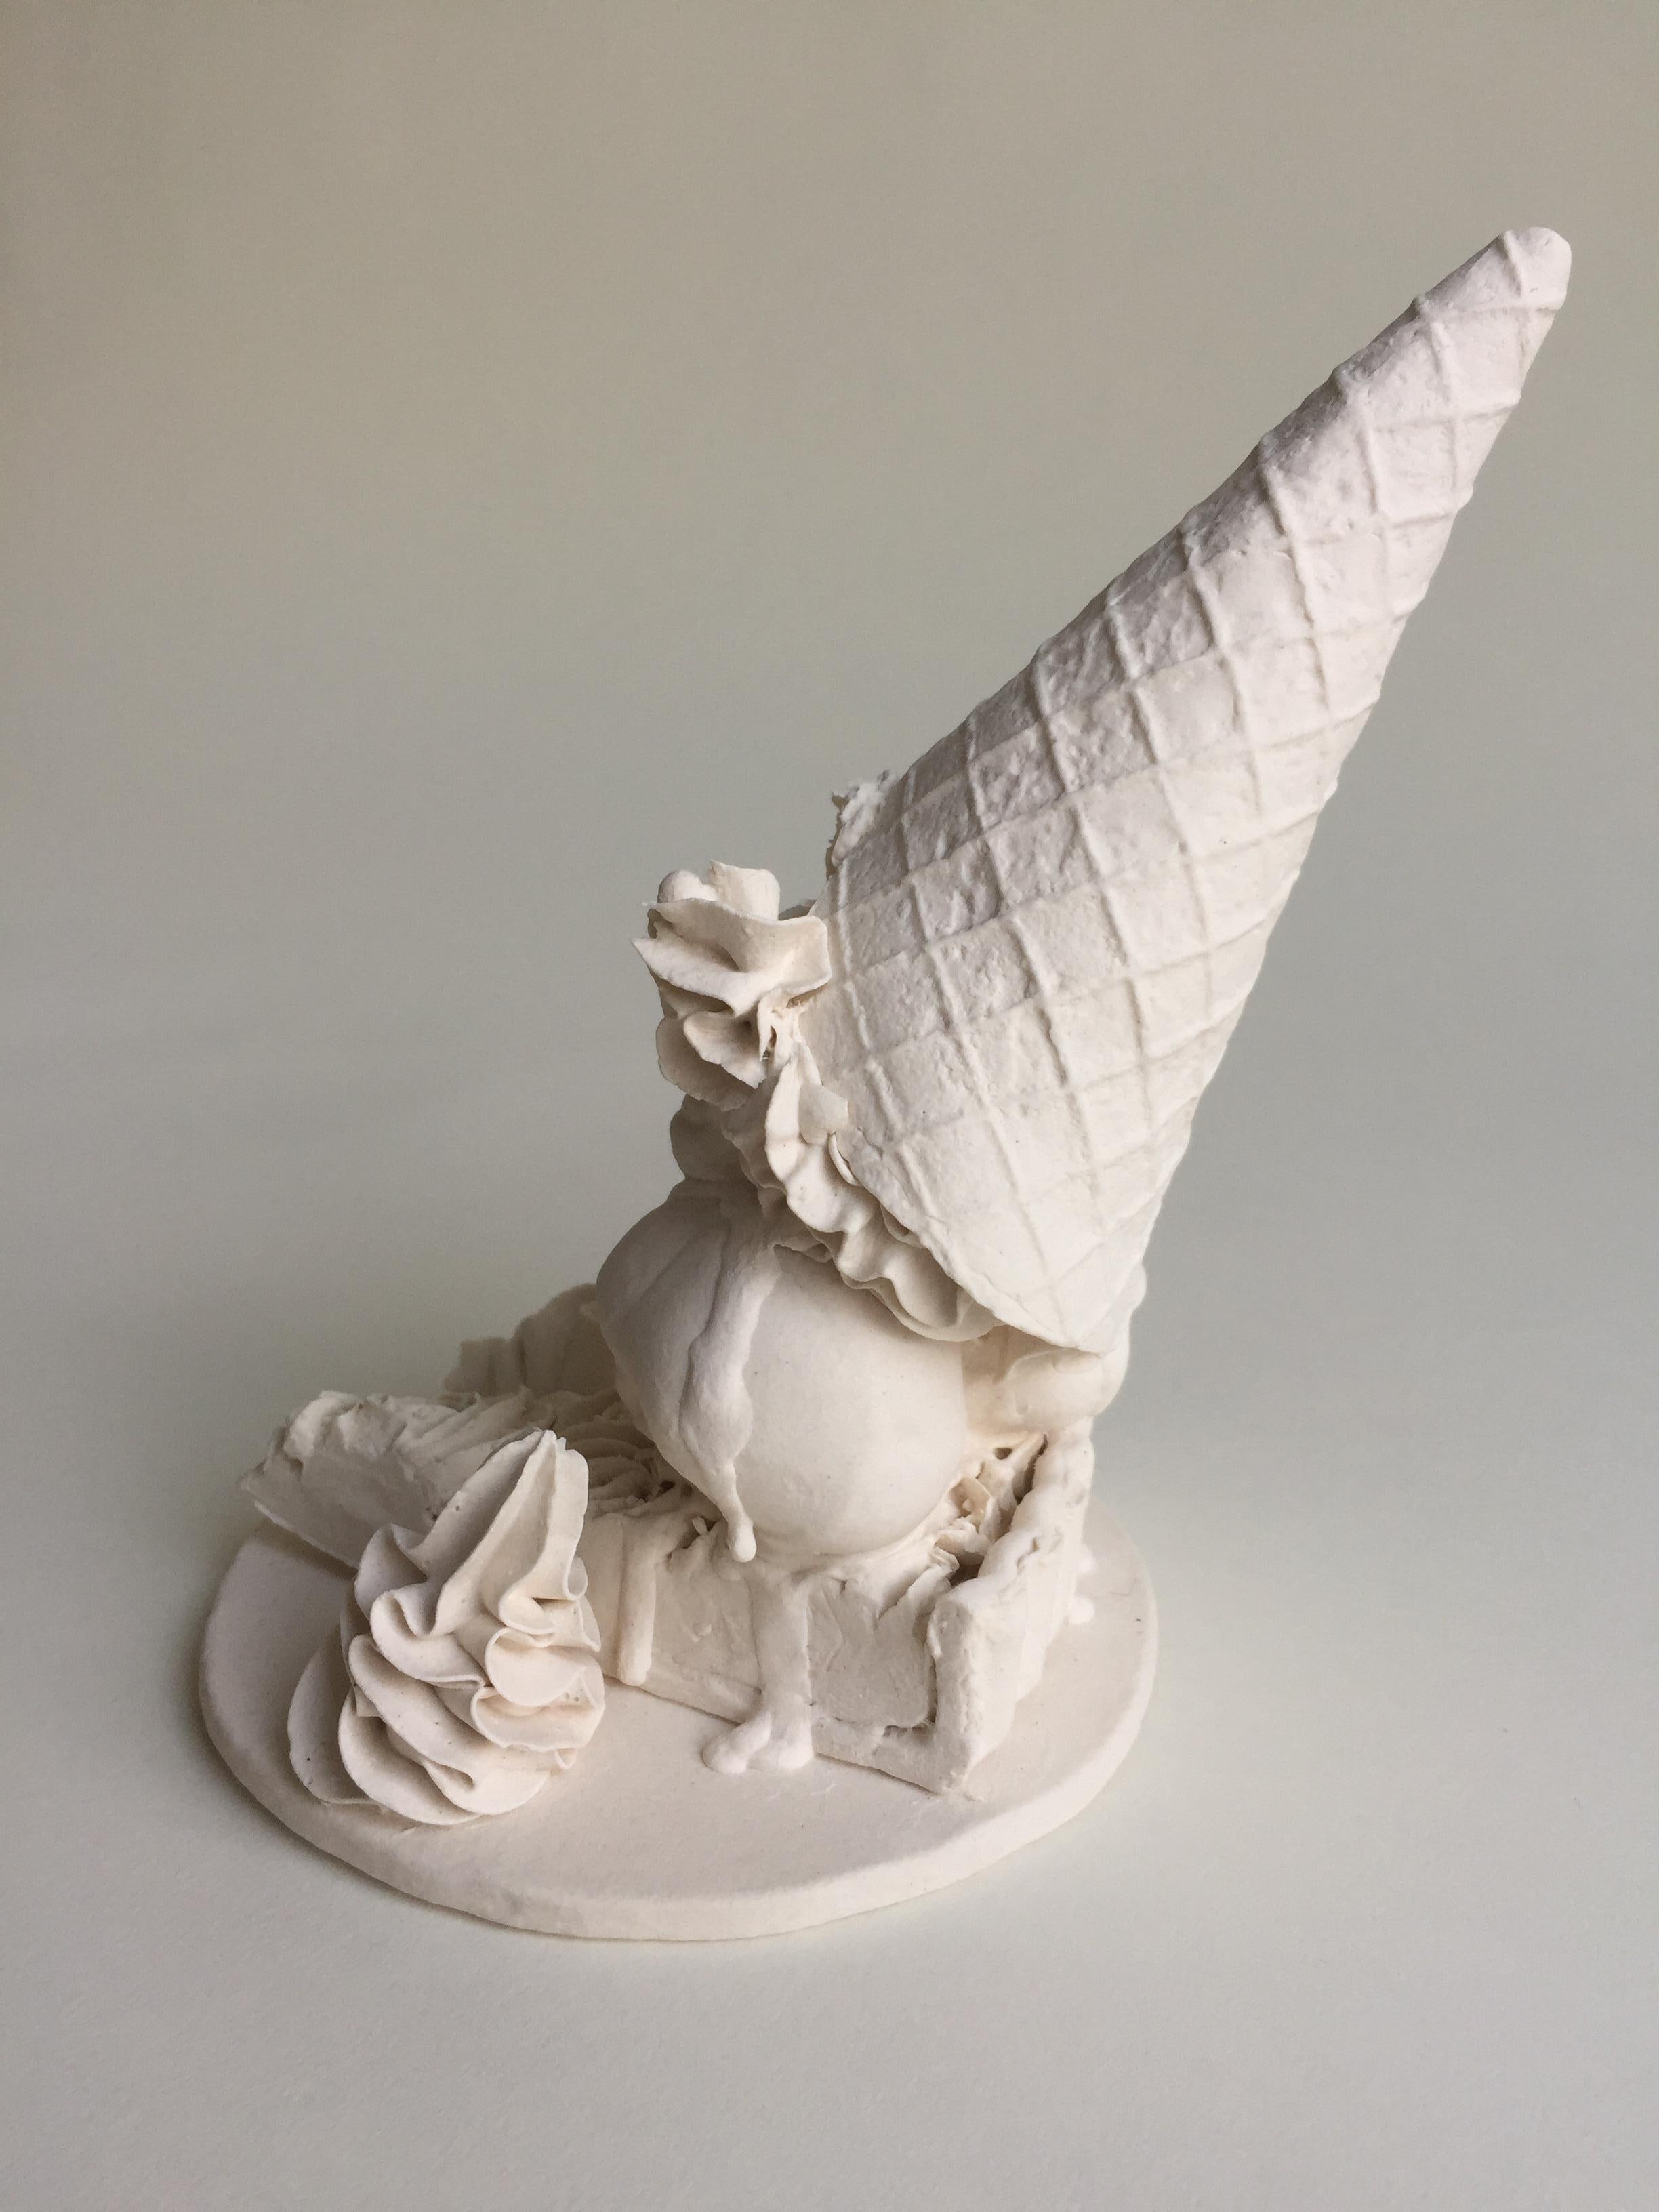 This piece consists of porcelain slip-casted and hand rolled cones, intricately topped with slip-casted fetus skulls, cookies and decorated with hand piped details and hand rolled sprinkles. Jacqueline Tse channels her love-hate relationship with